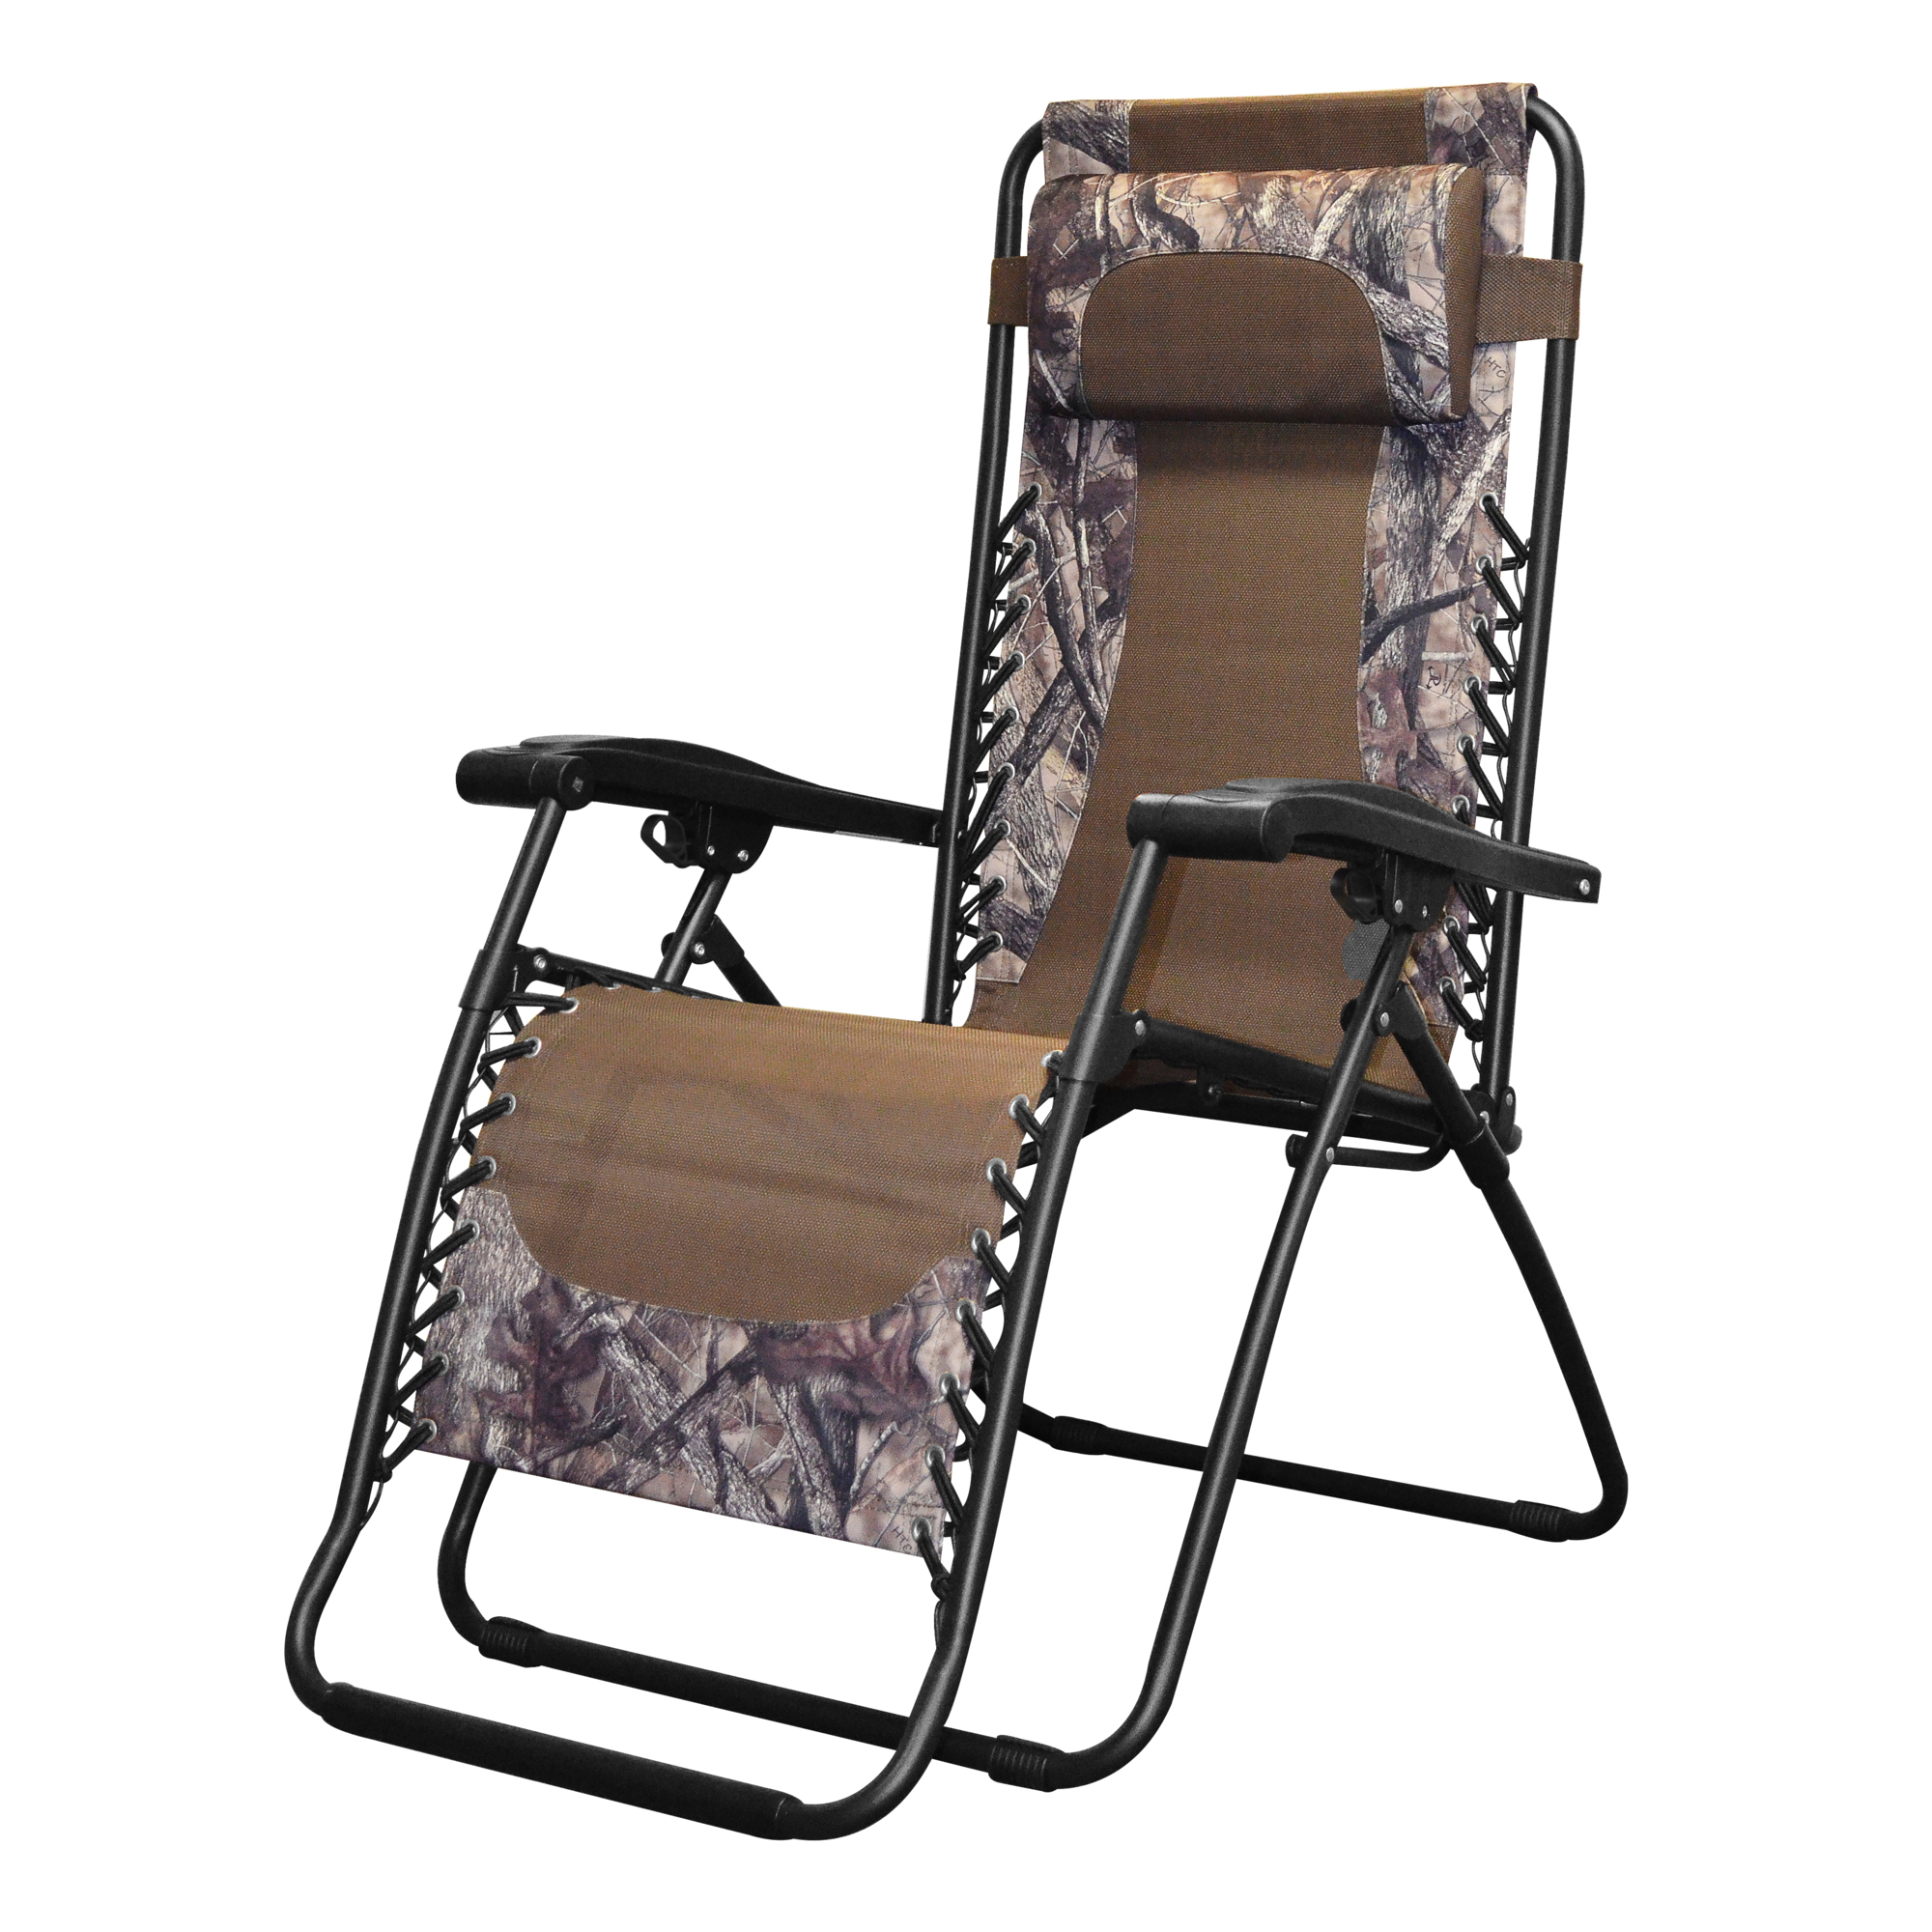 Caravan Canopy, Infinity Zero Gravity Chair Lounger, Primary Color Camouflage, Material Textile, Width 27.16 in, Model 80009000180